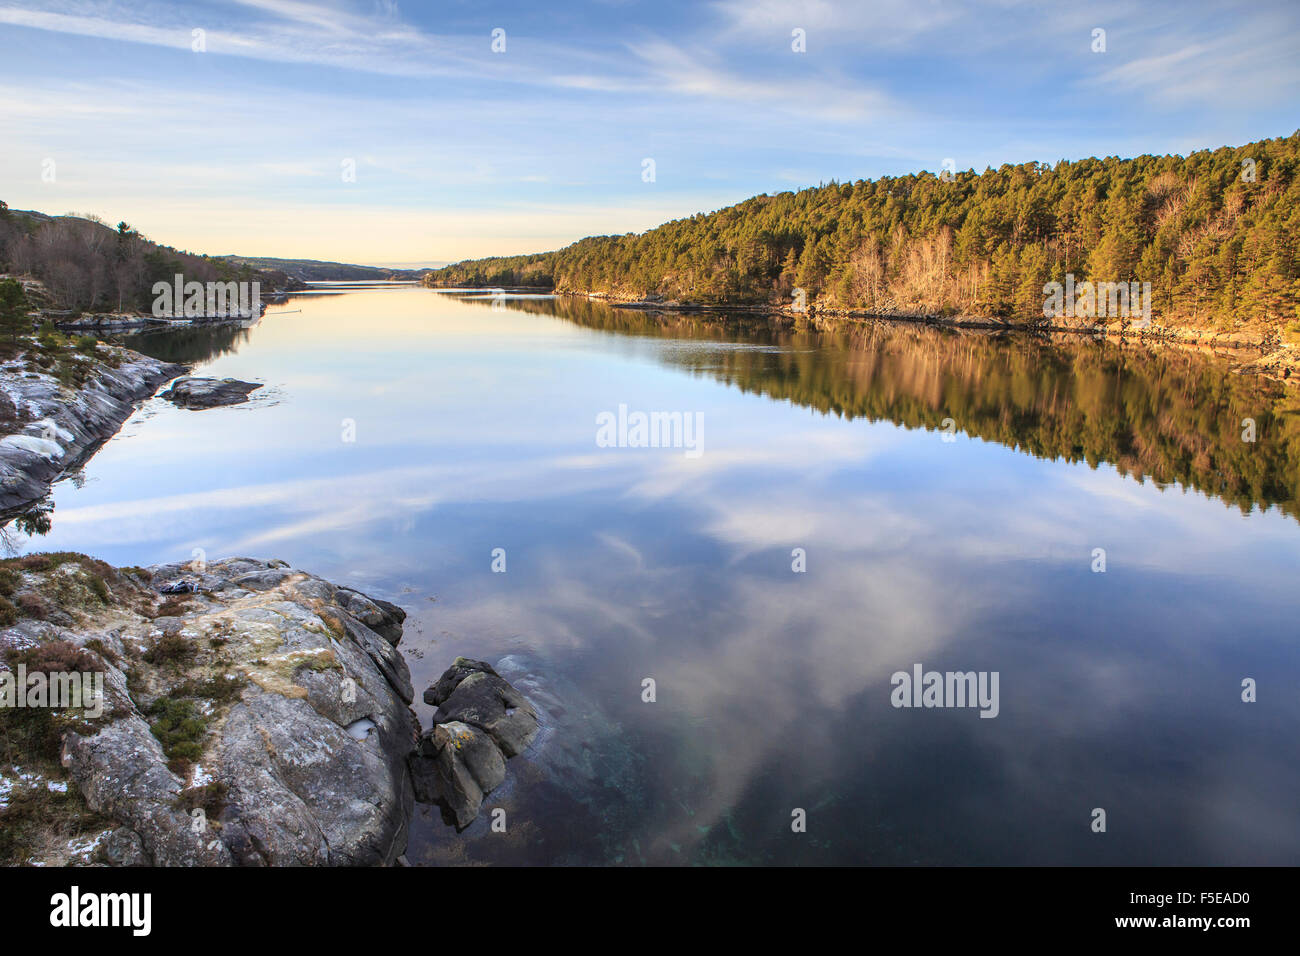 Woods reflected in the calm waters, Hitra Island, Trondelag, Norway, Scandinavia, Europe Stock Photo